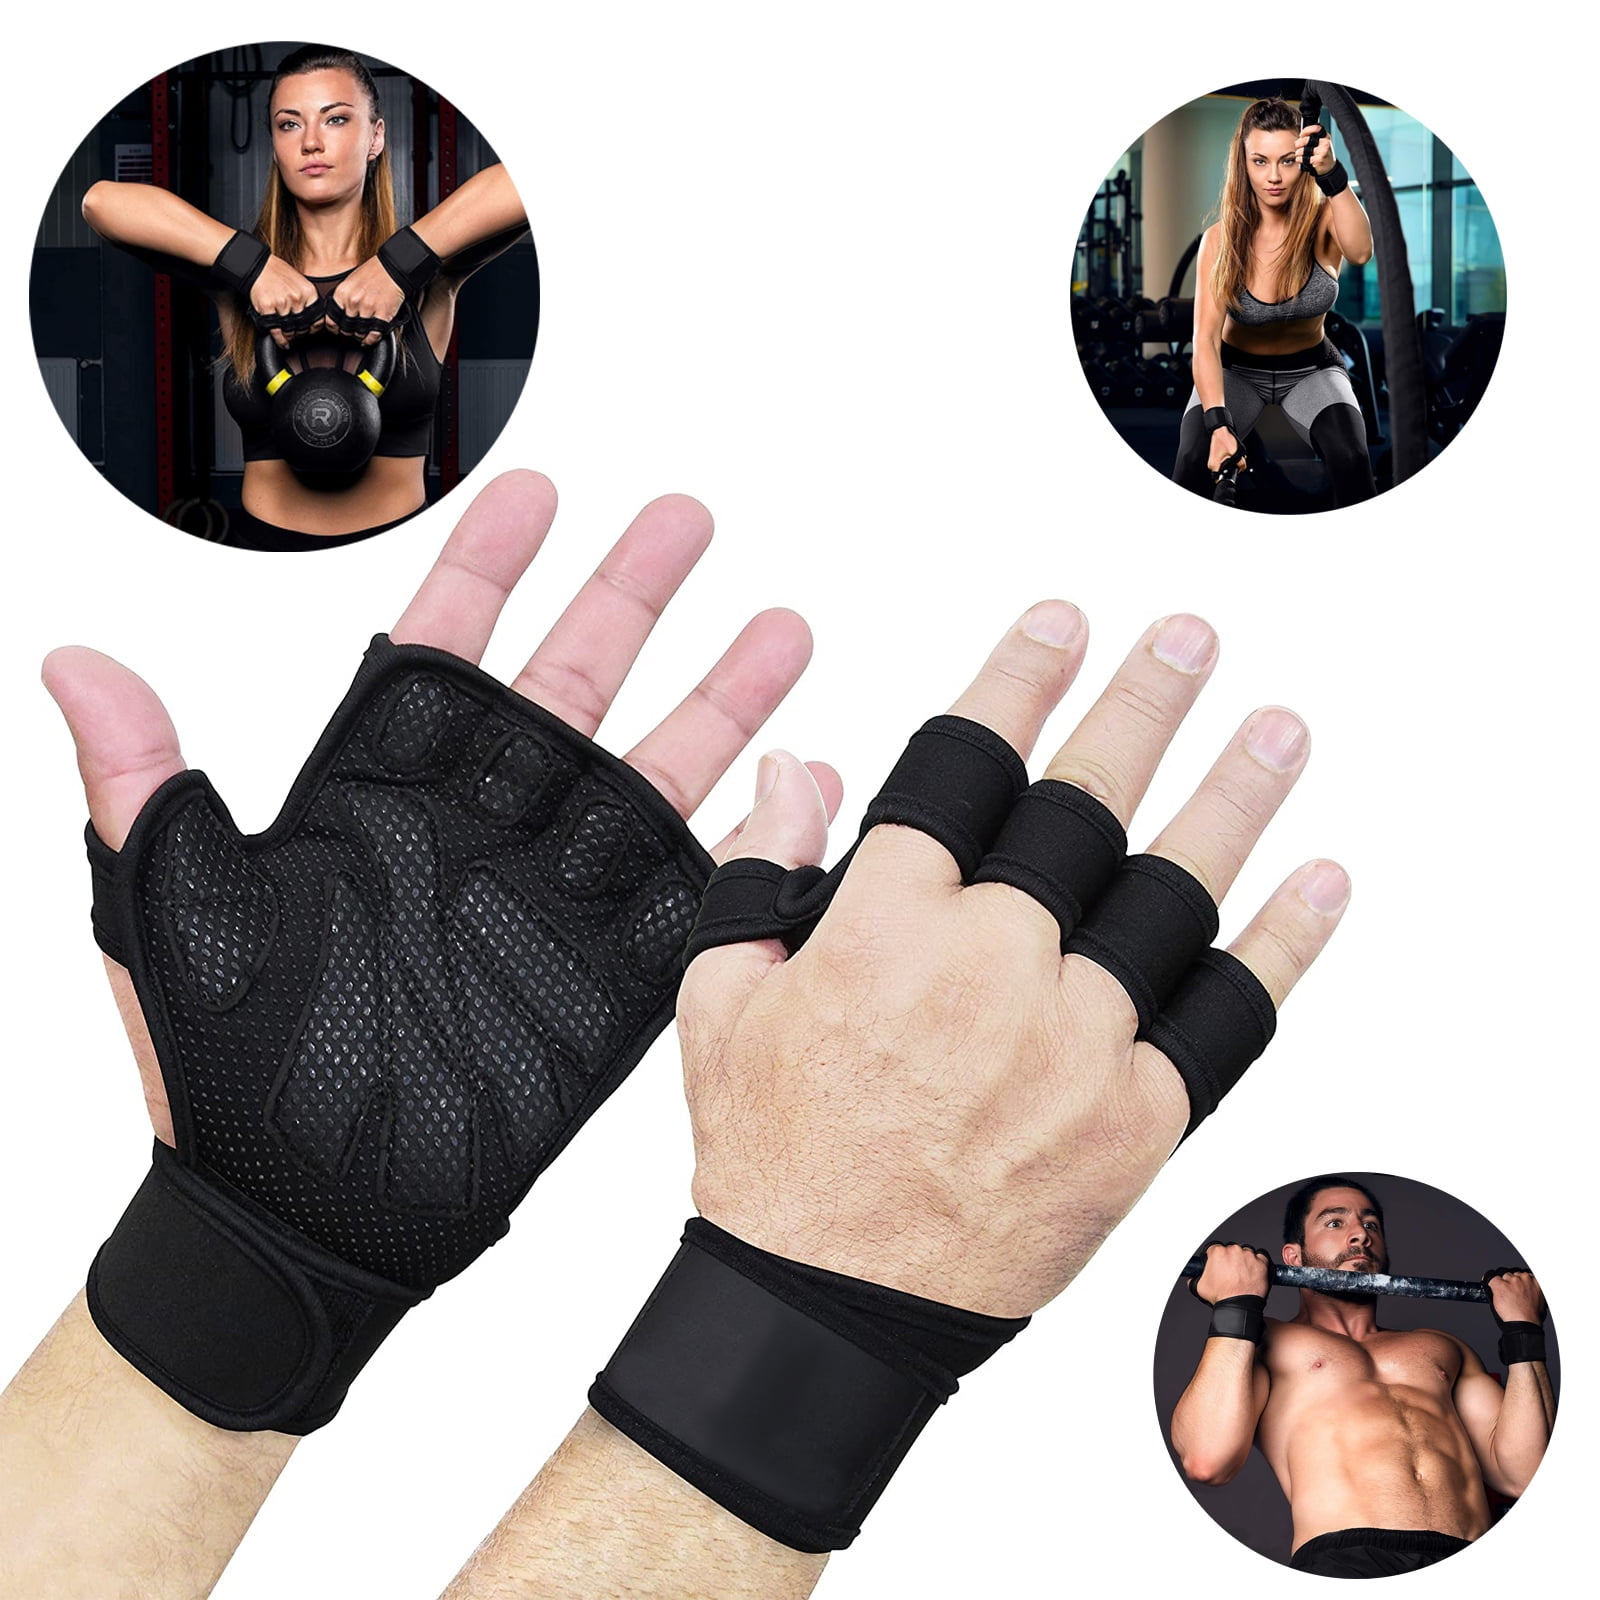 Full Palm Protection for Fitness Exercise Weightlifting Pull ups,Washable fitness gloves,Four Seasons General Gloves Hanging Fenver Sport Workout Gloves Mens and Women Weight Lifting Gloves with Wrist Support for Gym Training 